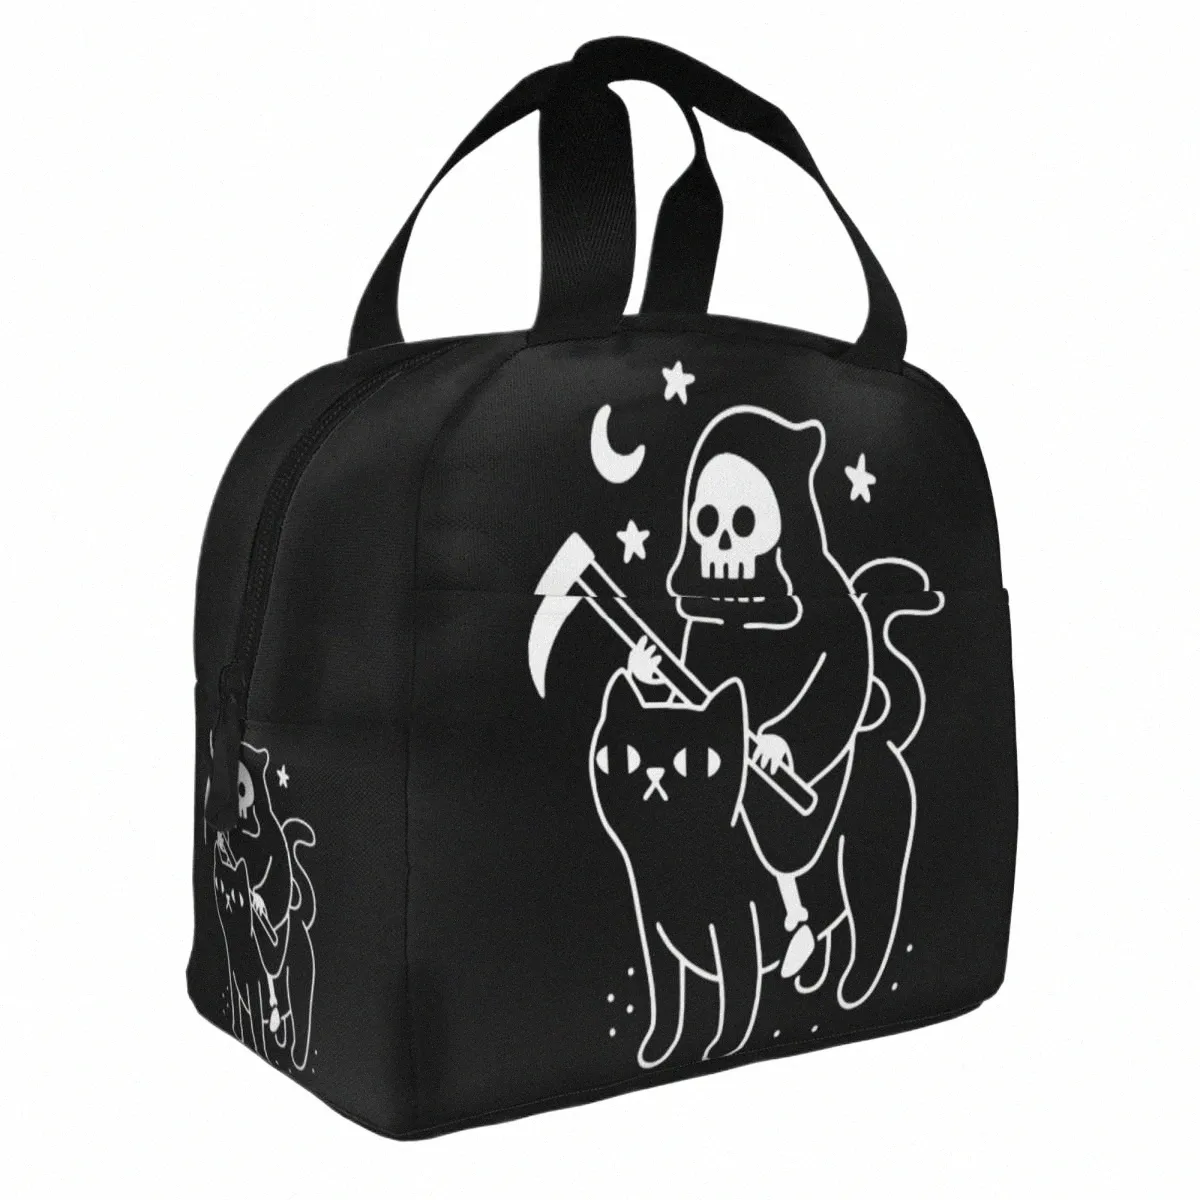 Death Rides A Black Cat Isolated Lunch Bags Thermal Bag Meal Ctainer Horror Halen Grim Reaper Funky Tote Lunch Box D97k#